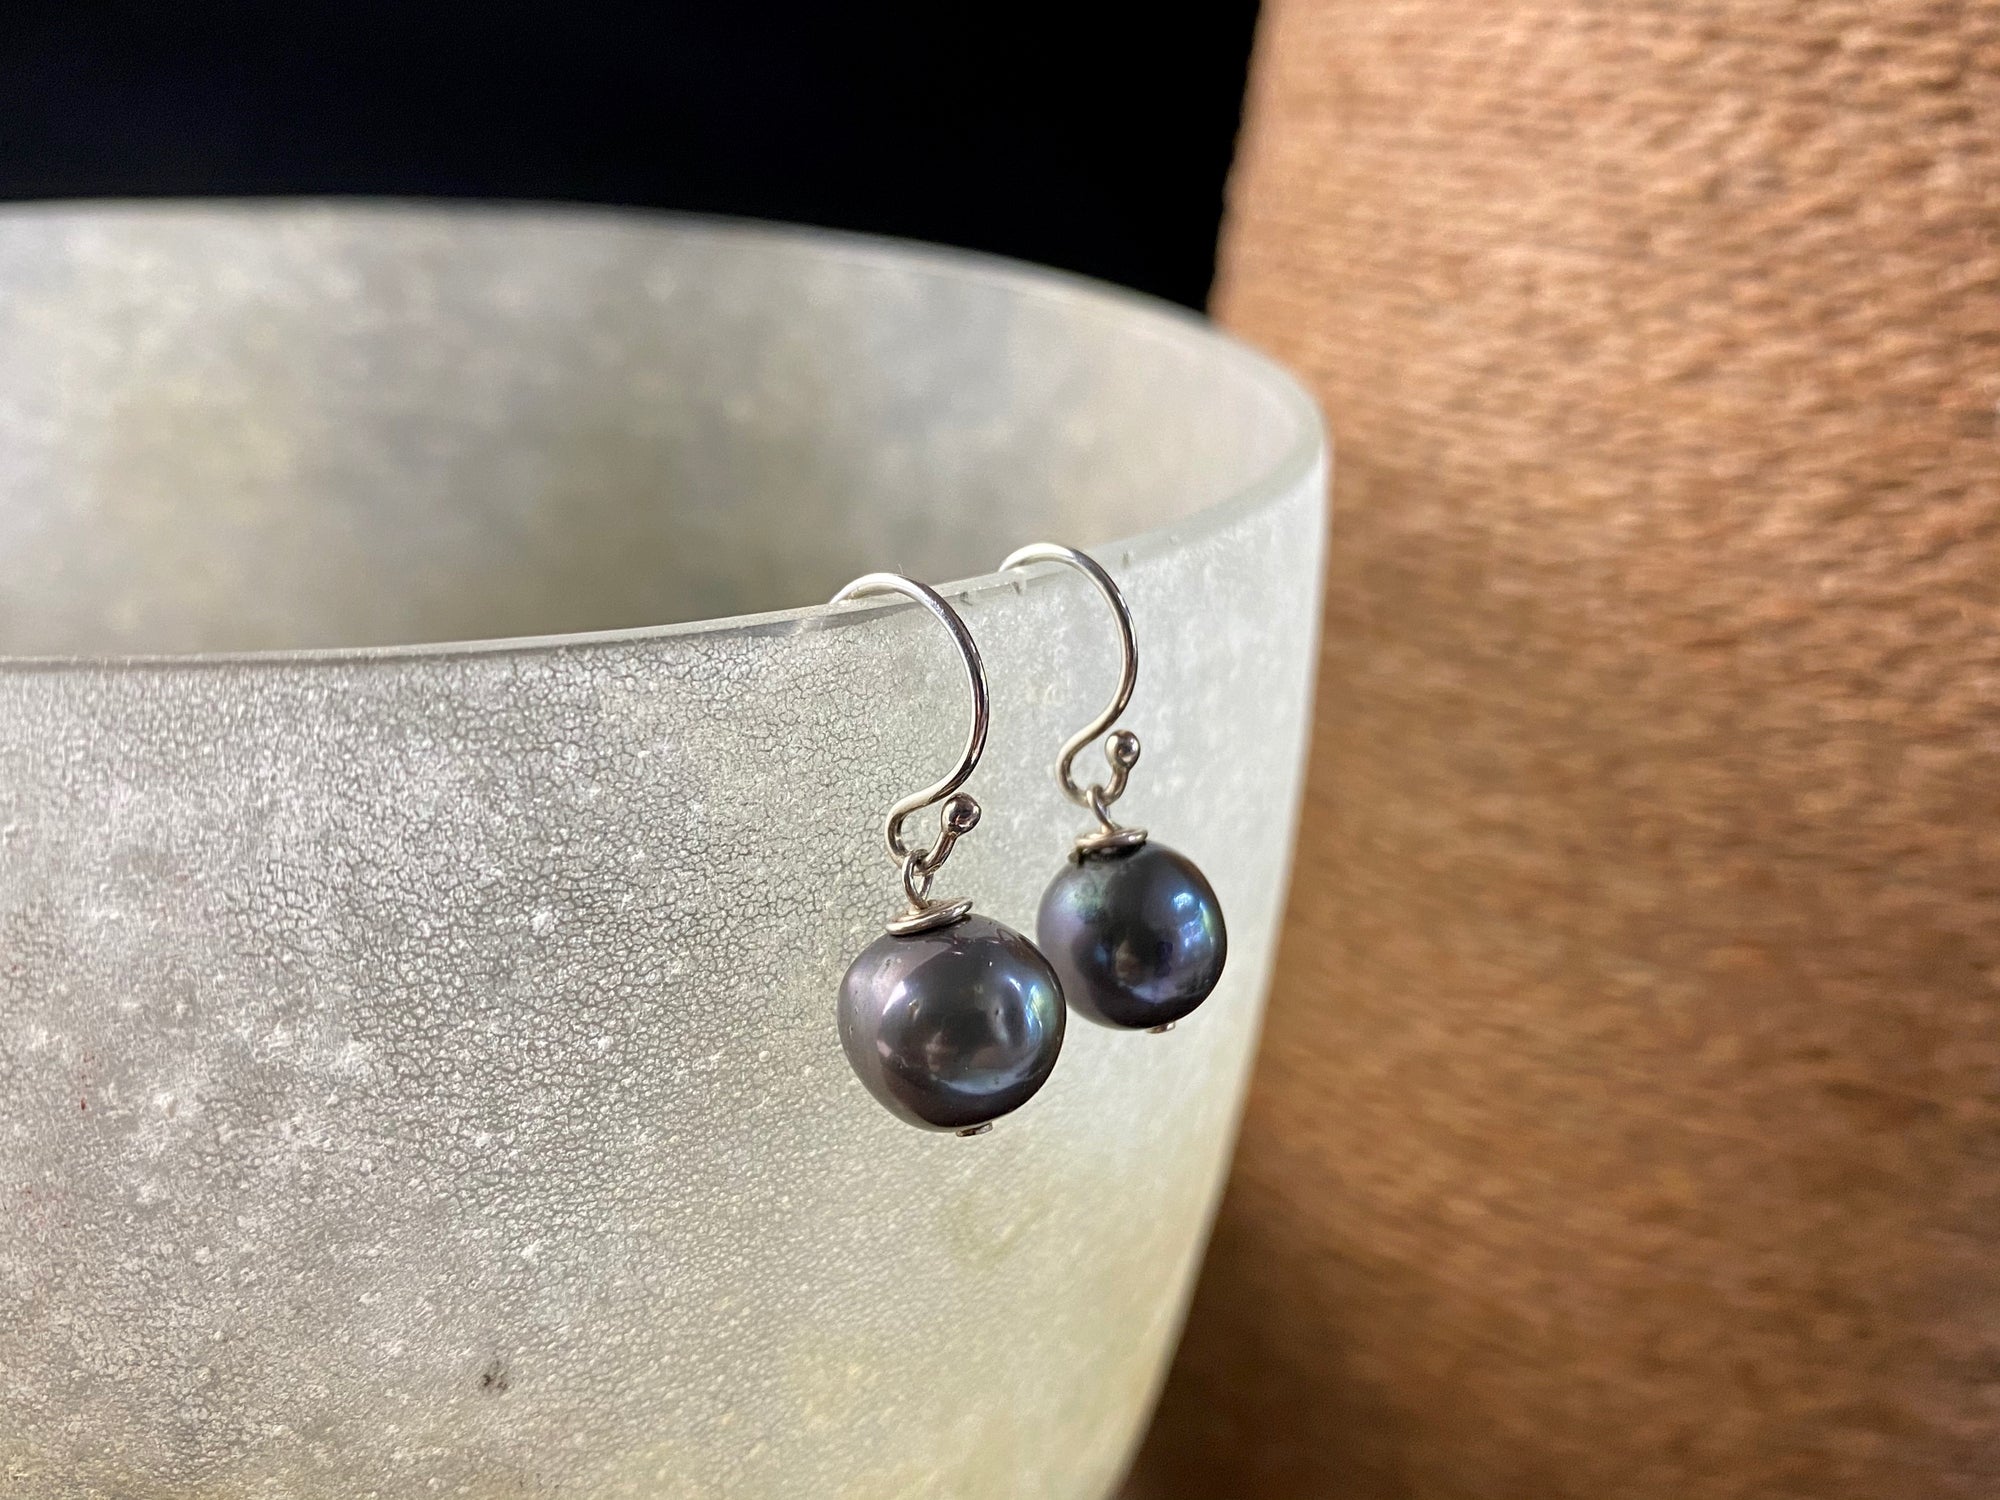 Cultured round black pearl earrings featuring high quality black Burmese pearls 7 mm in diameter and sterling silver hooks